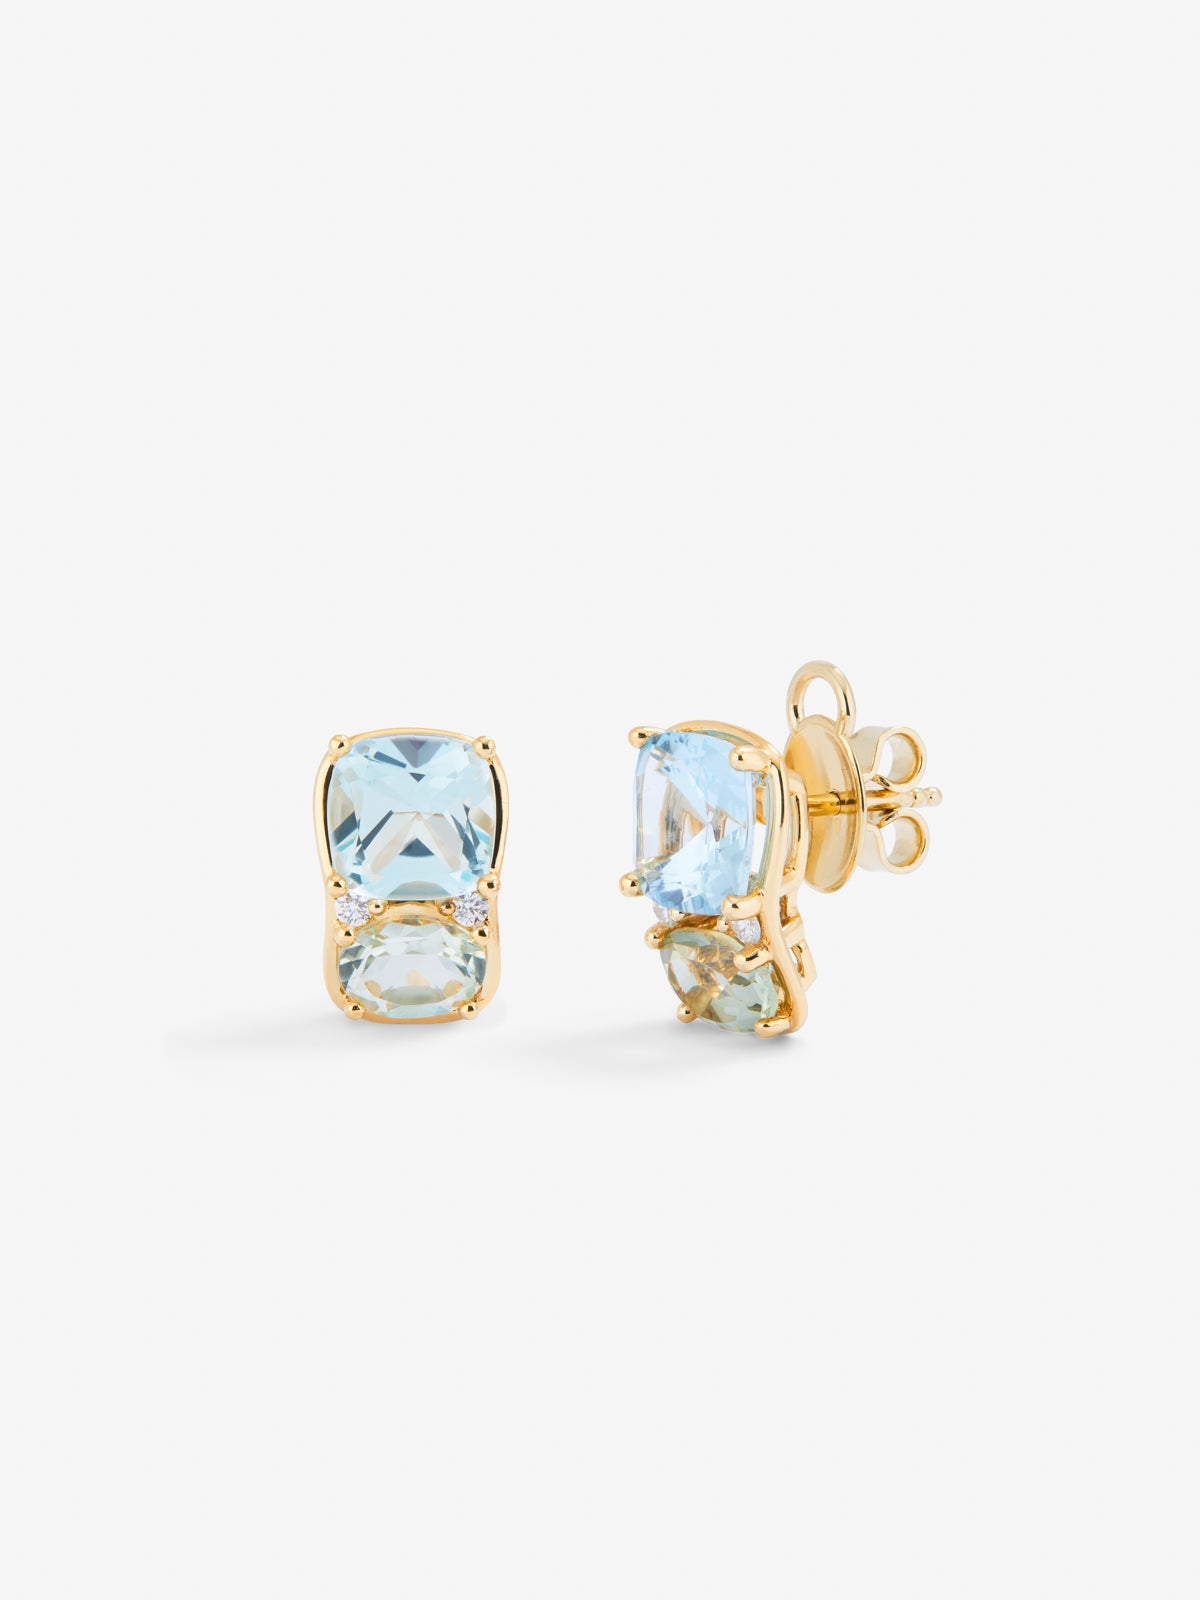 18K yellow gold earrings with 2 cushion-cut sky blue topazes with a total of 6.4 cts, 2 oval-cut green amethysts with a total of 1.62 cts and 4 brilliant-cut diamonds with a total of 0.11 cts